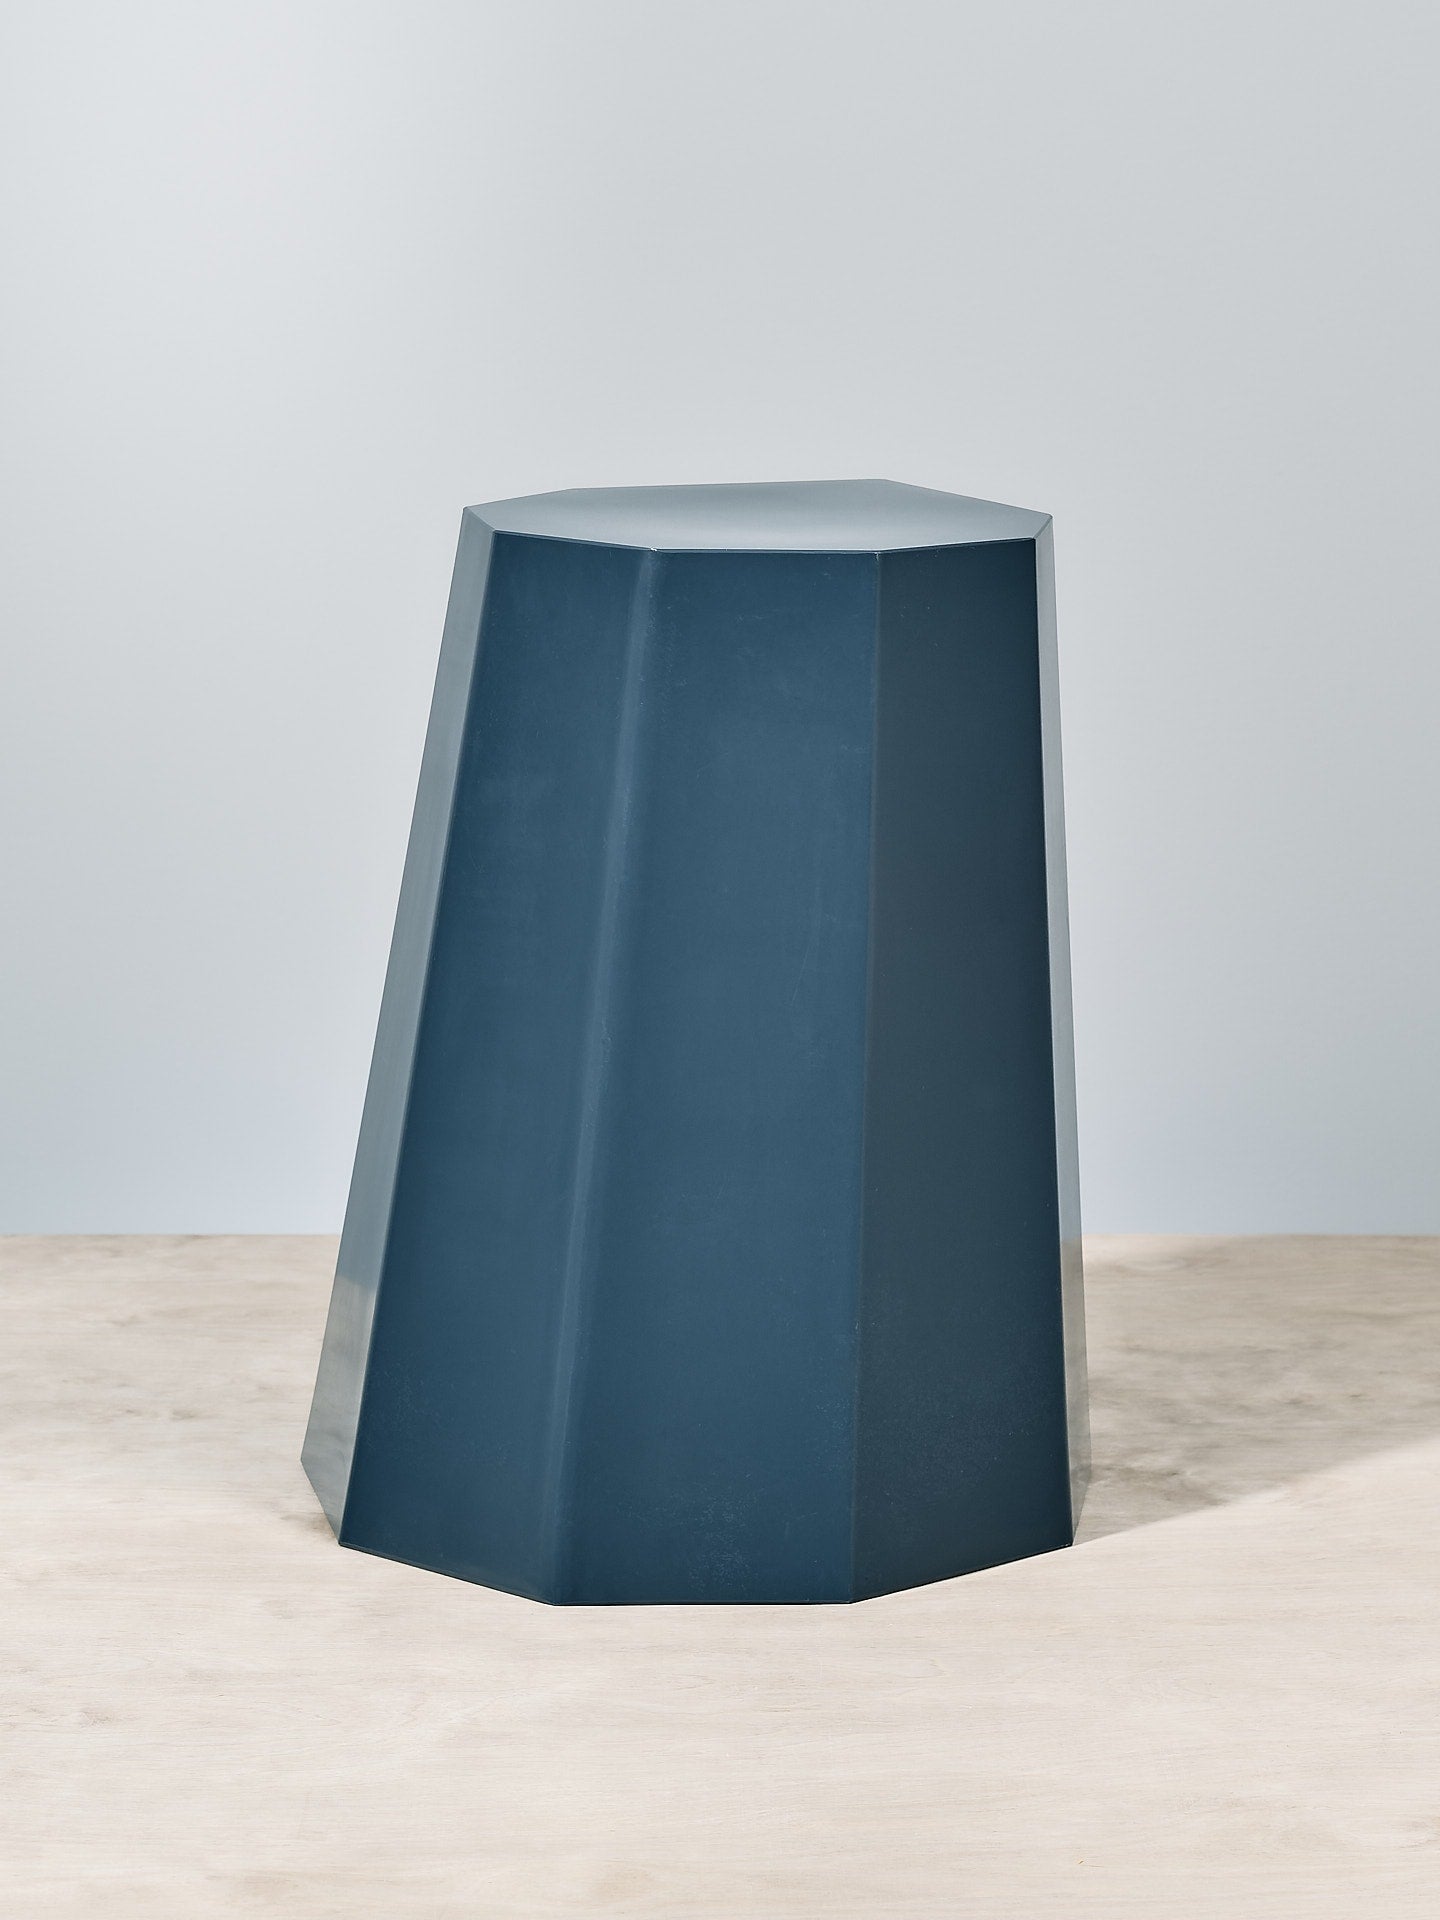 A Martino Gamper Arnold Circus Stool - Navy on a wooden floor.